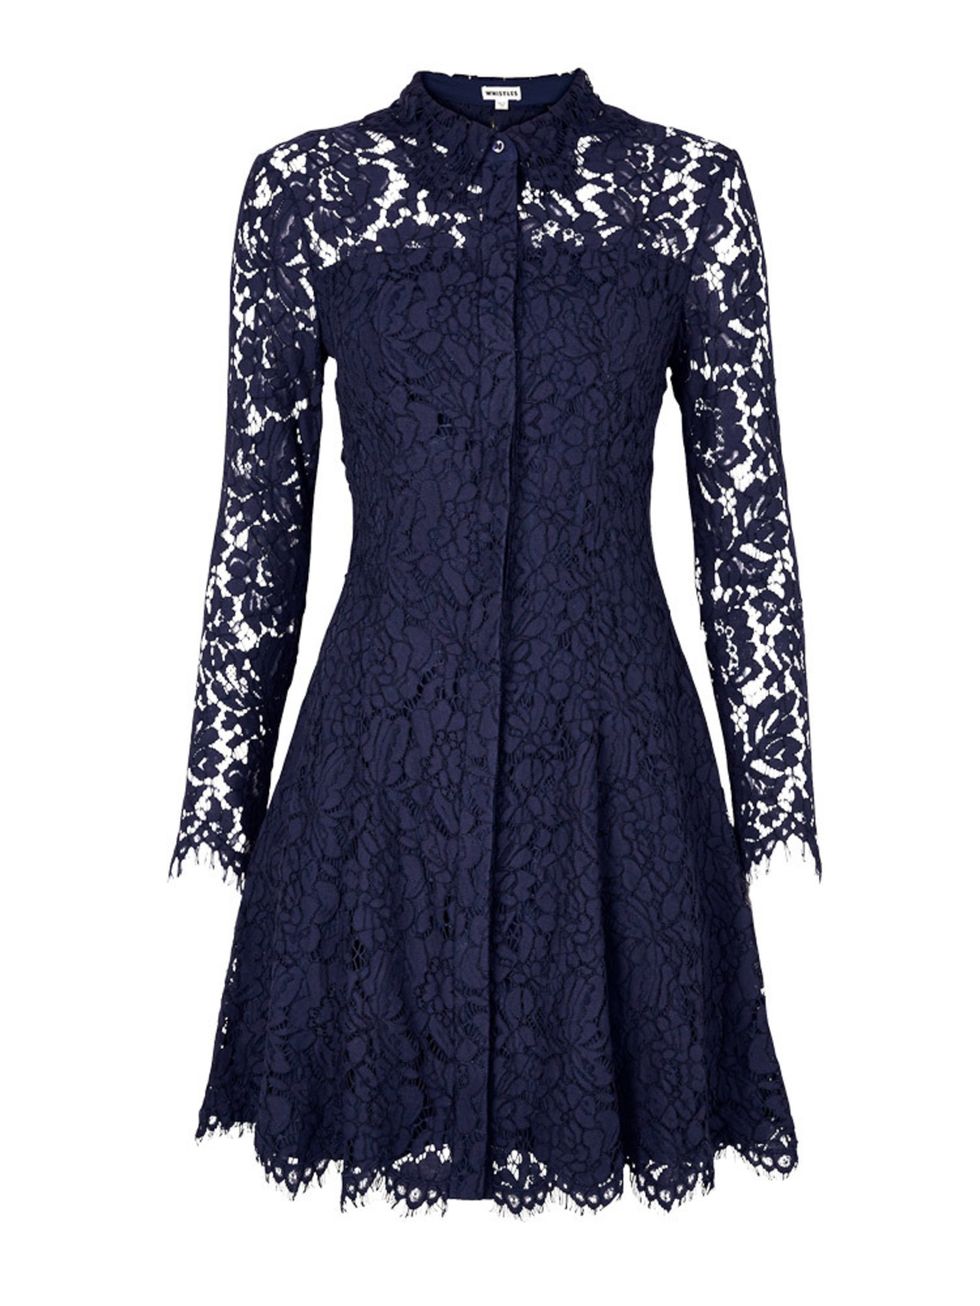 <p><a href="http://www.veryexclusive.co.uk/whistles-lace-shirt-dress-navy/1600053872.prd" target="_blank">Whistles</a> dress, £195</p>